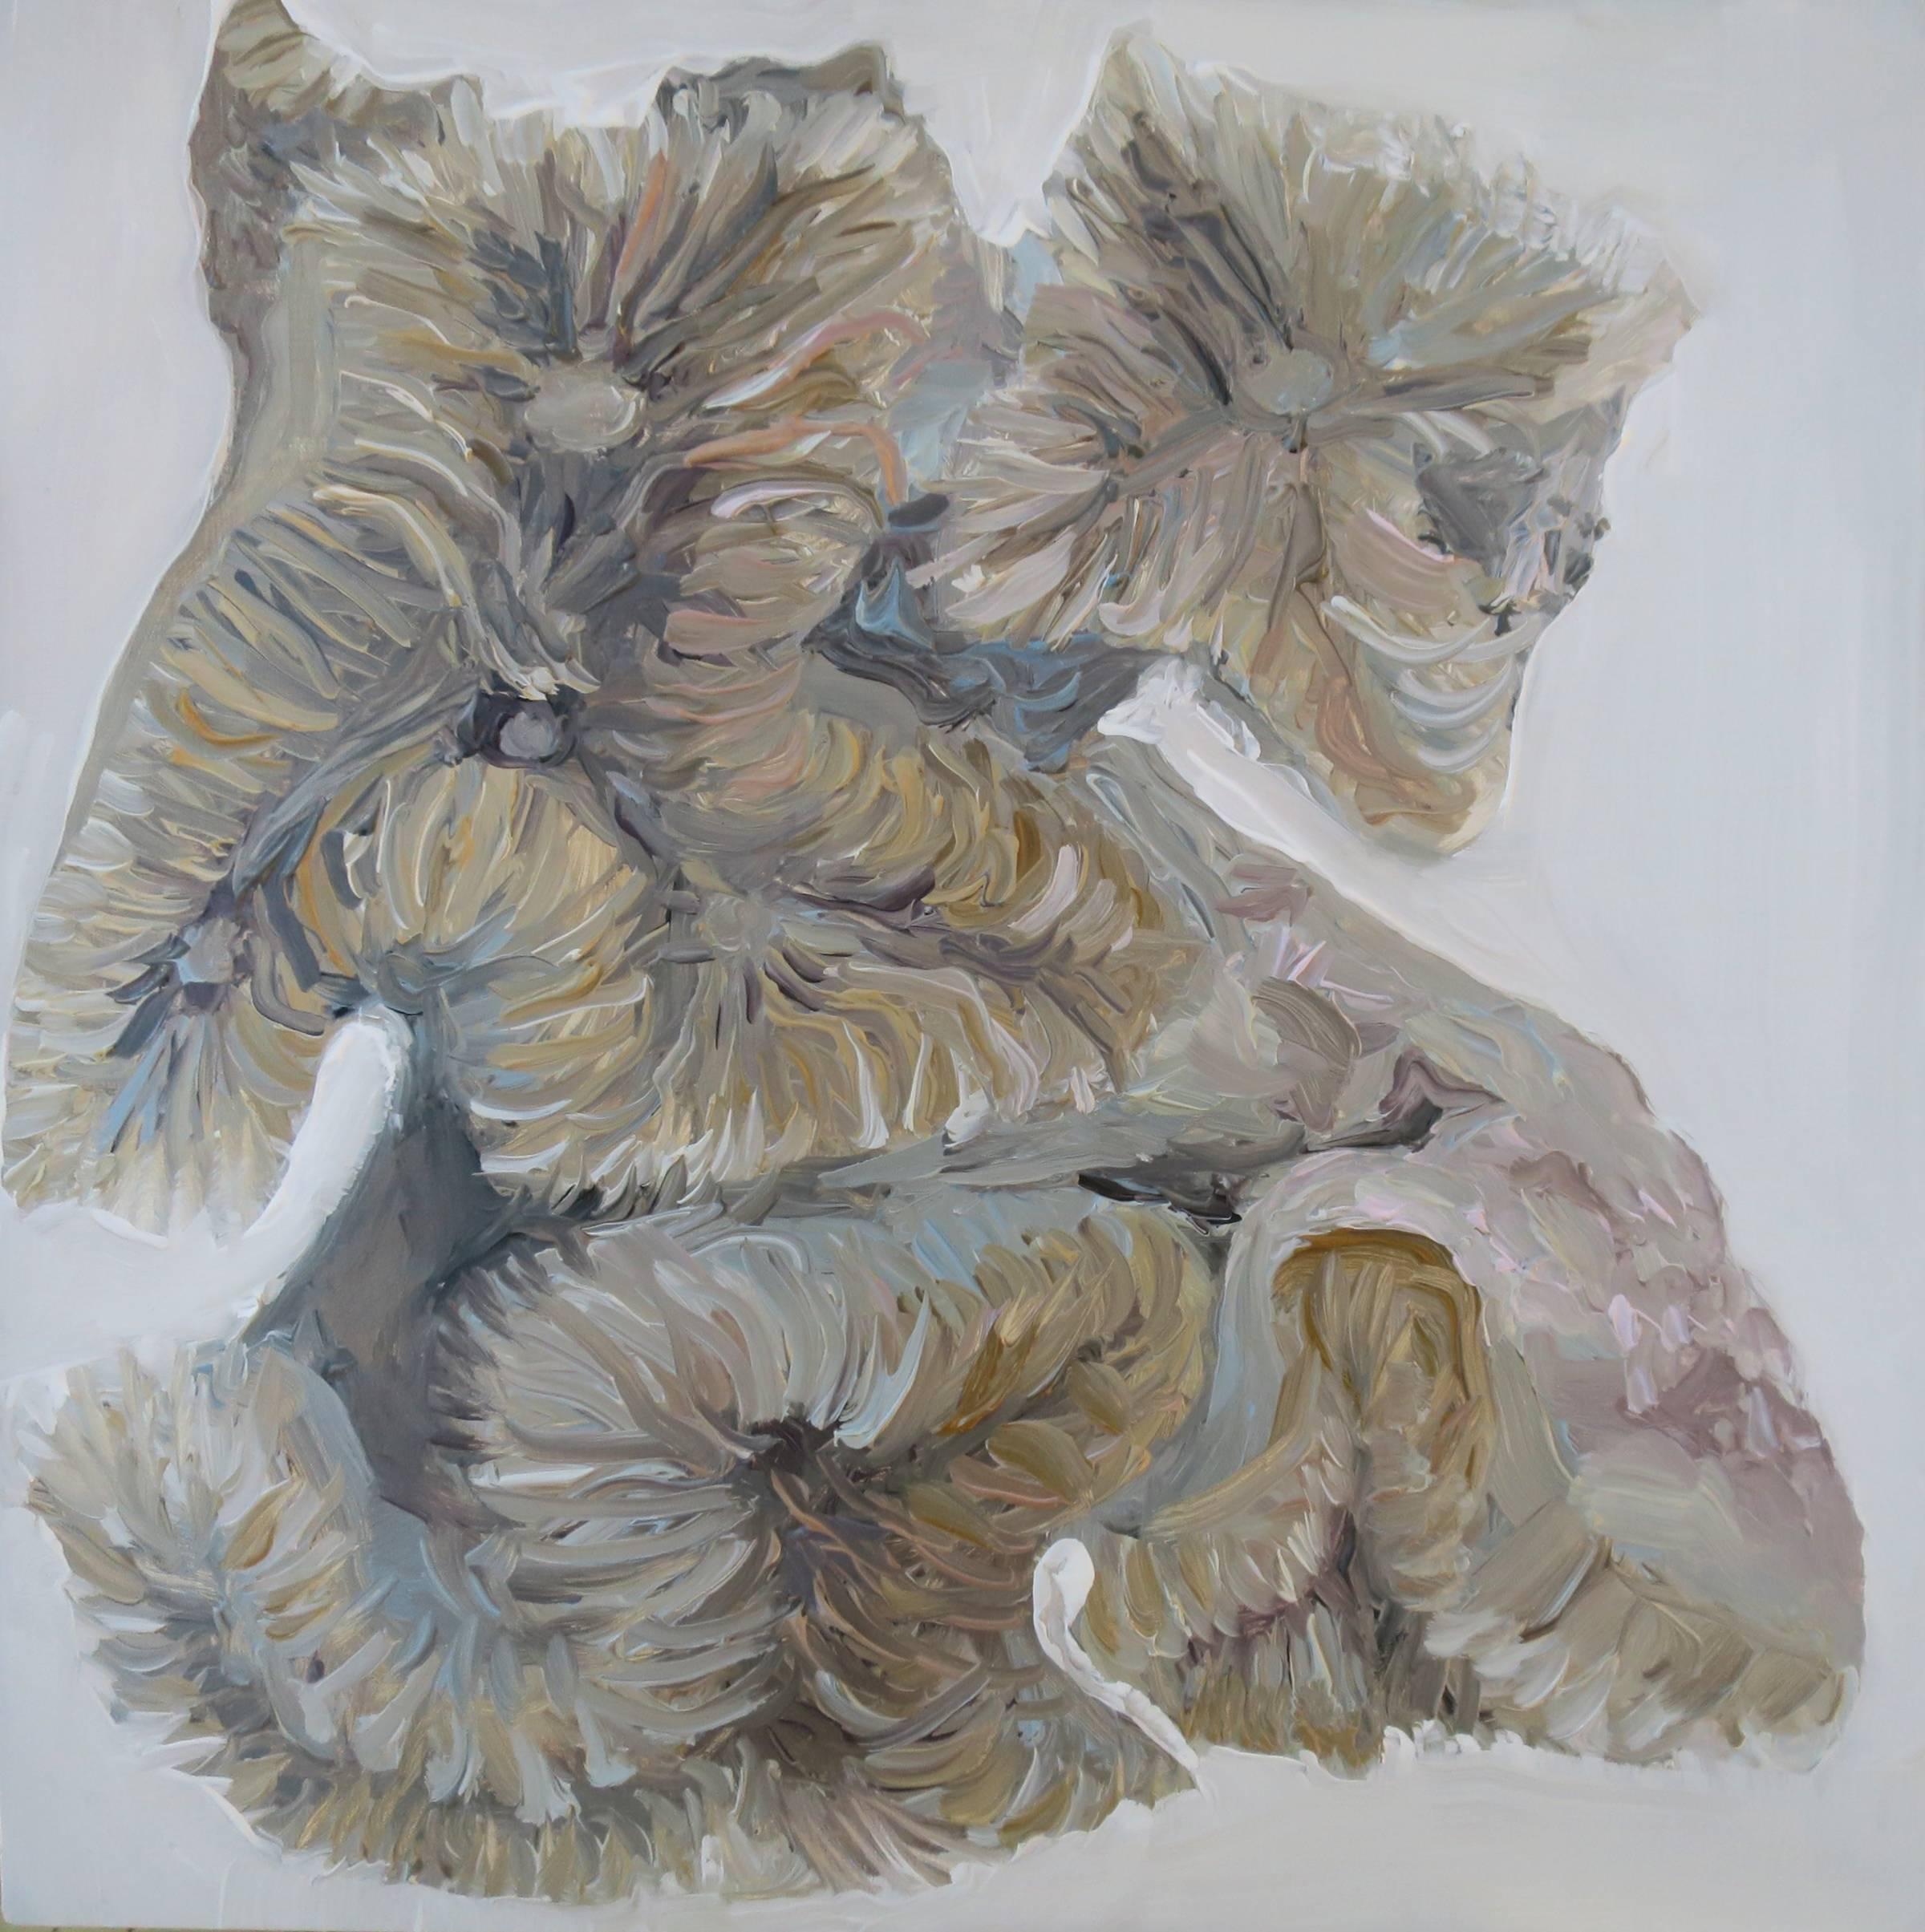 Katy Richards is a contemporary painter, whose recent body of work is focused on the fluidity of oil paint and the subject matter of  the human body and life under the water. Her paintings are a careful balance between imagery that can be viewed as